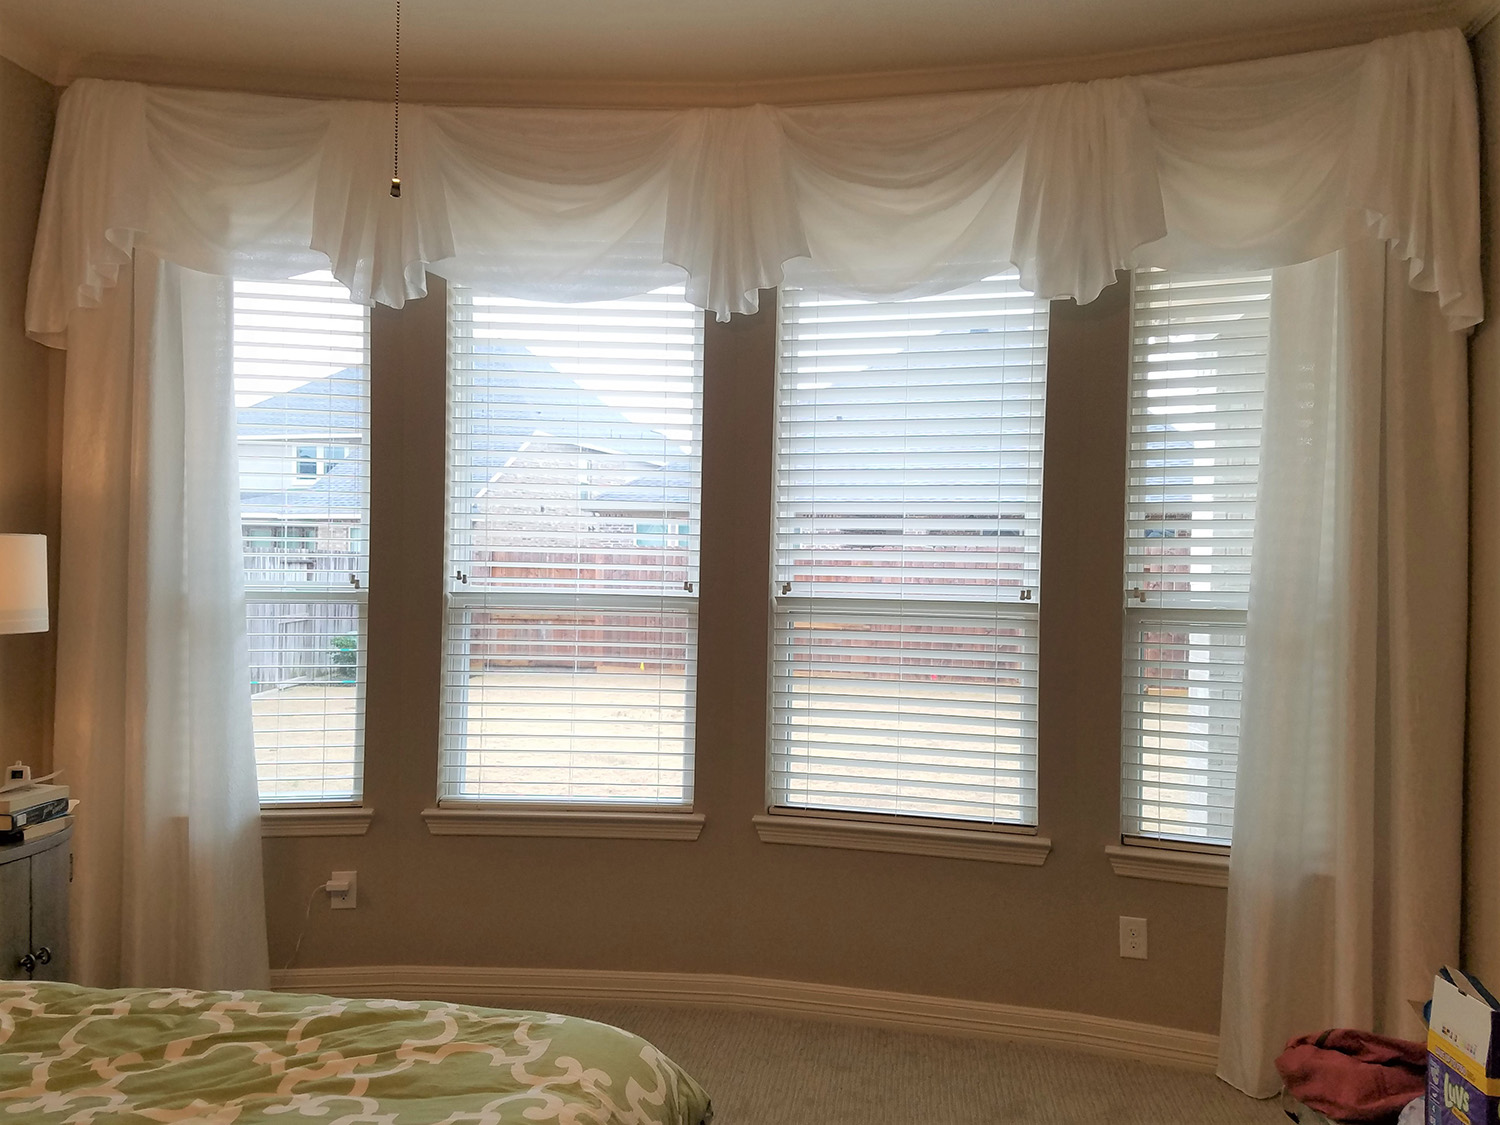 Board mounted Empire style sheer valance_1500x1125